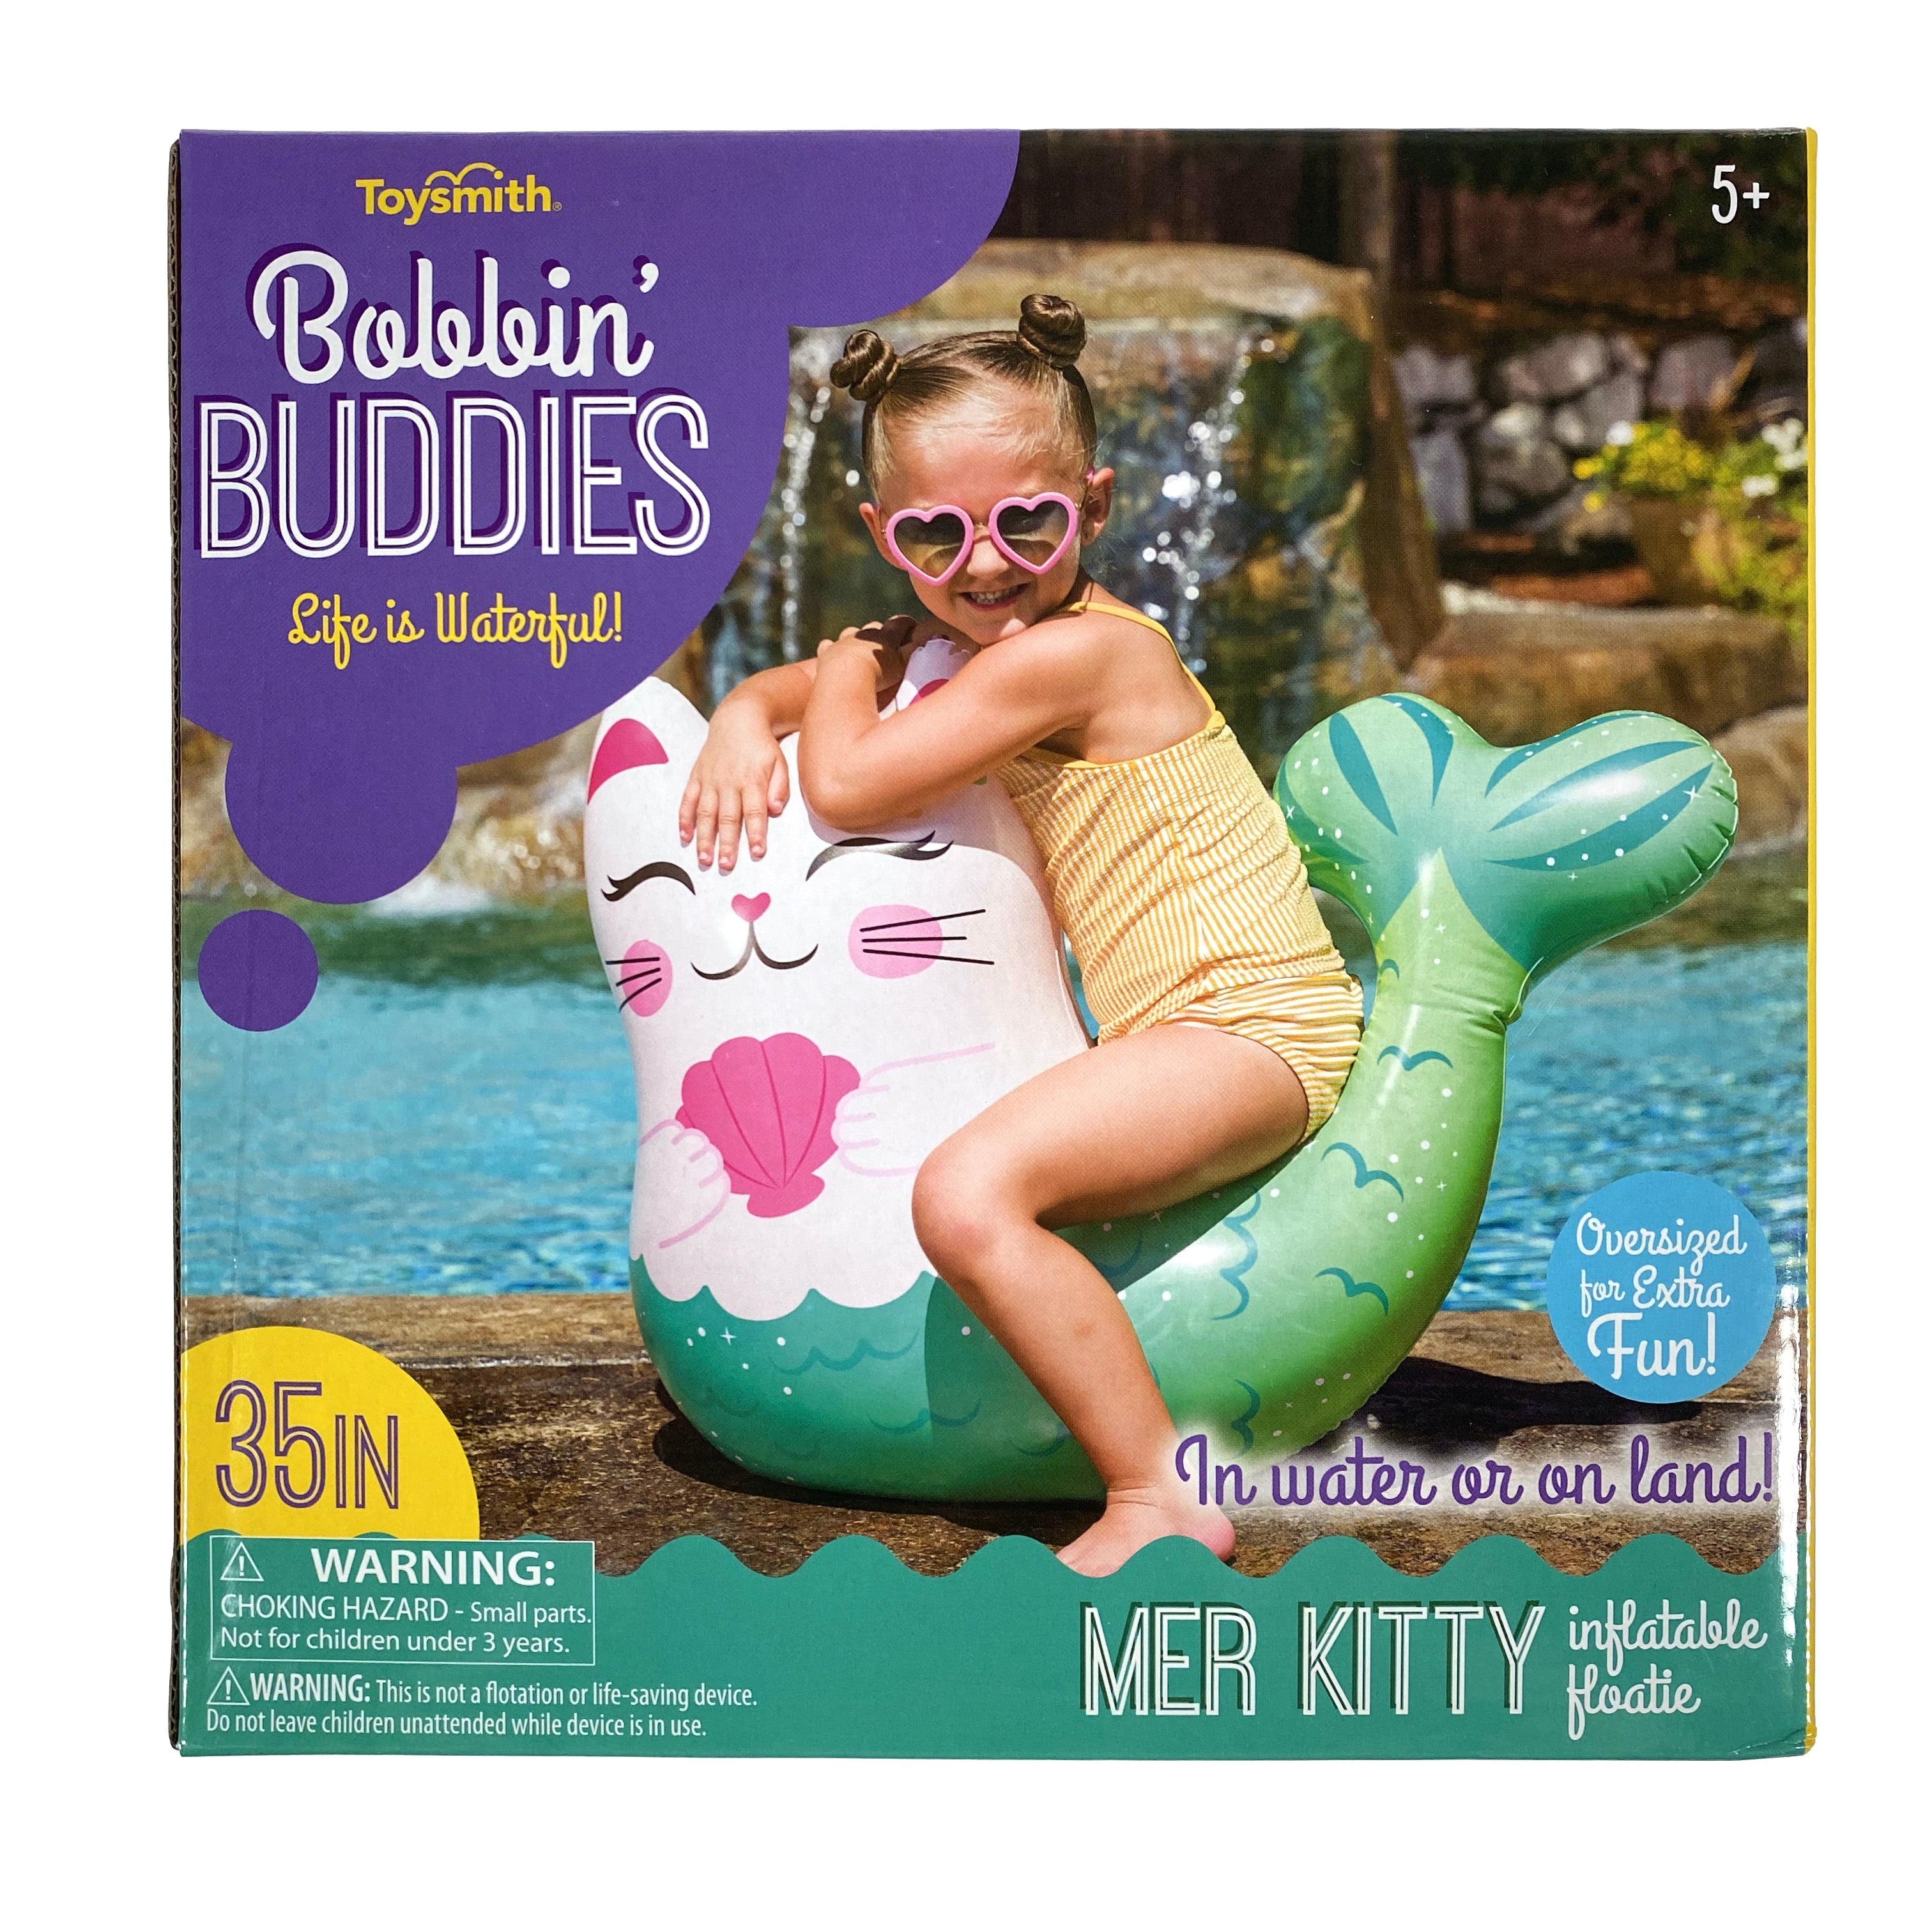 Inflatable Mer-Kitty    